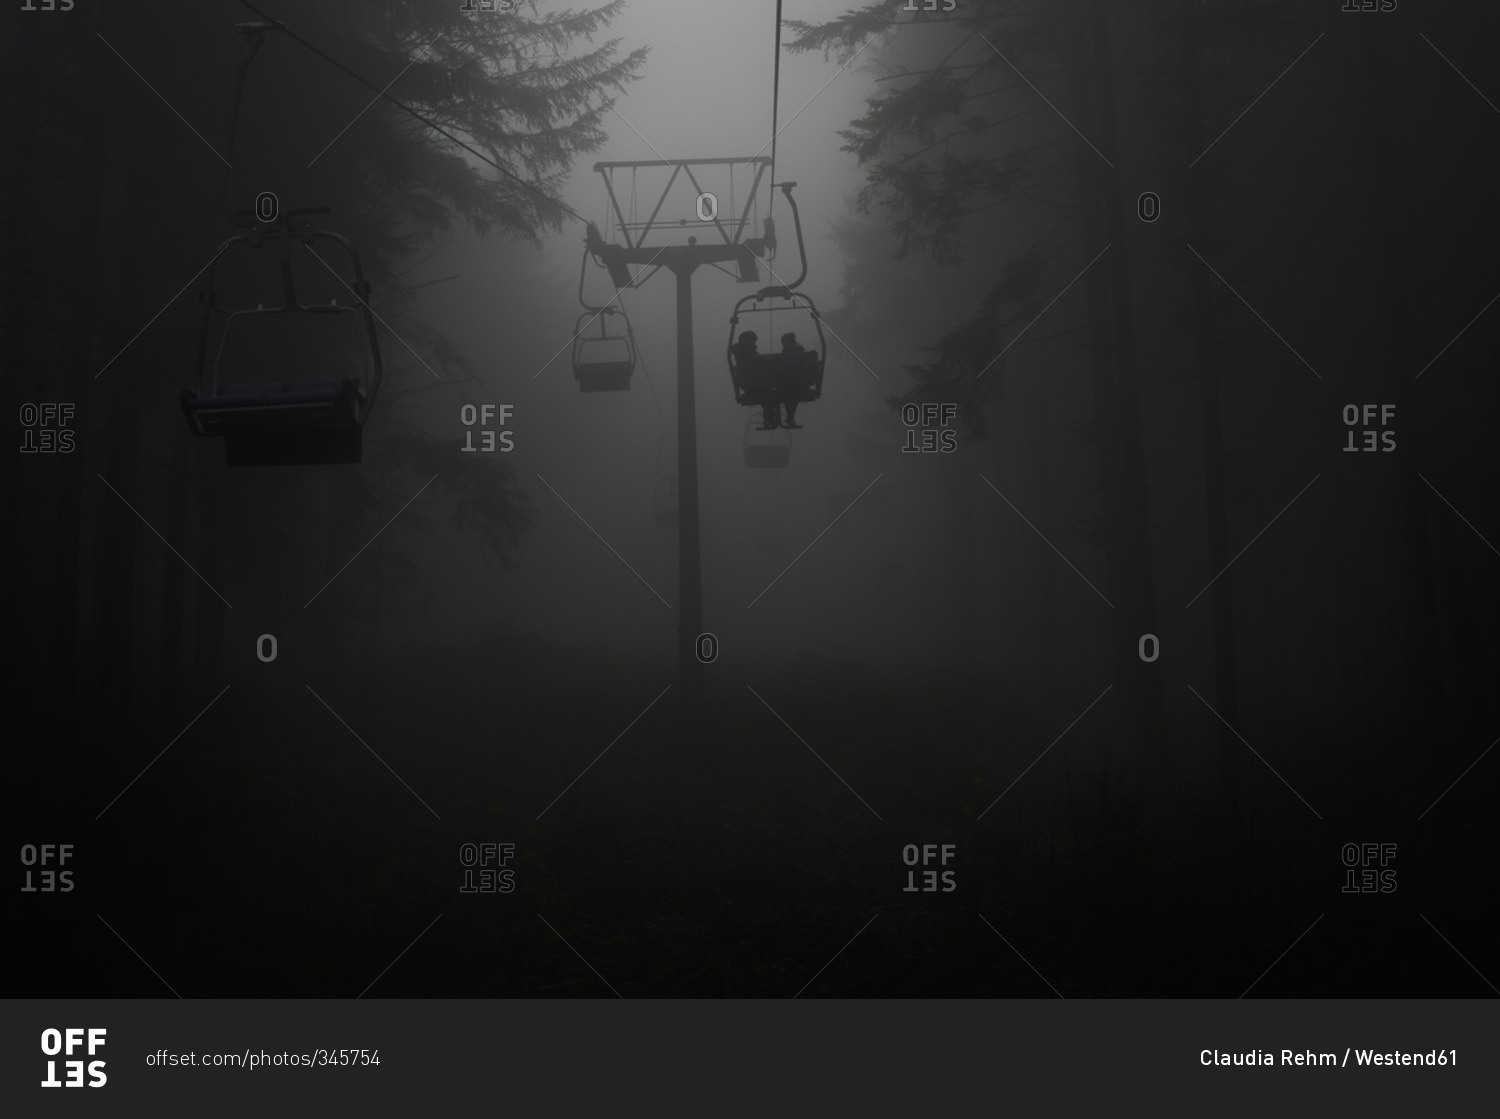 Germany, silhouettes of people using chairlift at haze